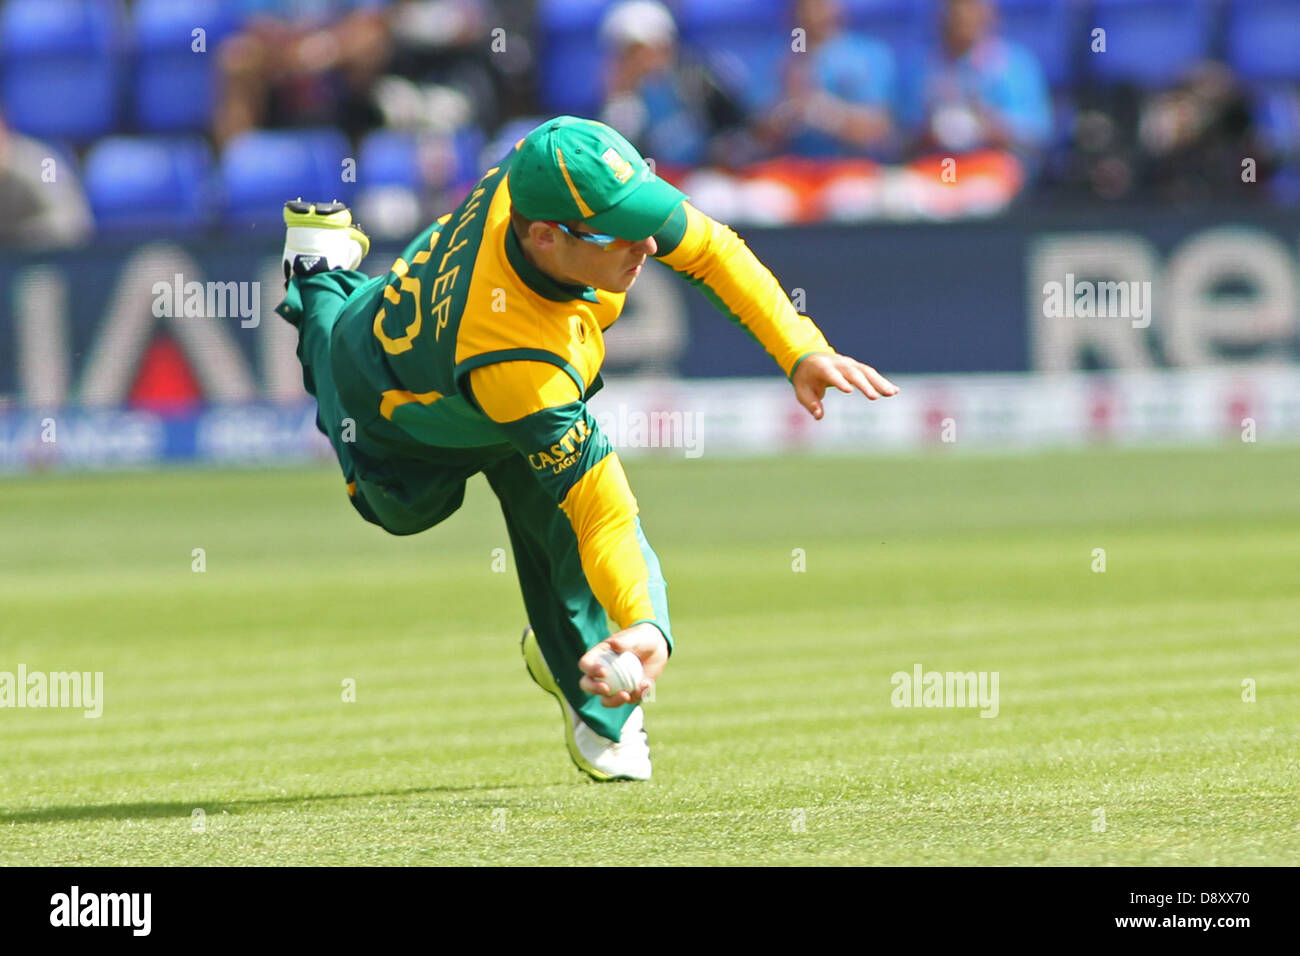 CARDIFF, WALES - June 06: South Africa's David Miller fielding during the  ICC Champions Trophy international cricket match between India and South  Africa at Cardiff Wales Stadium on June 06, 2013 in